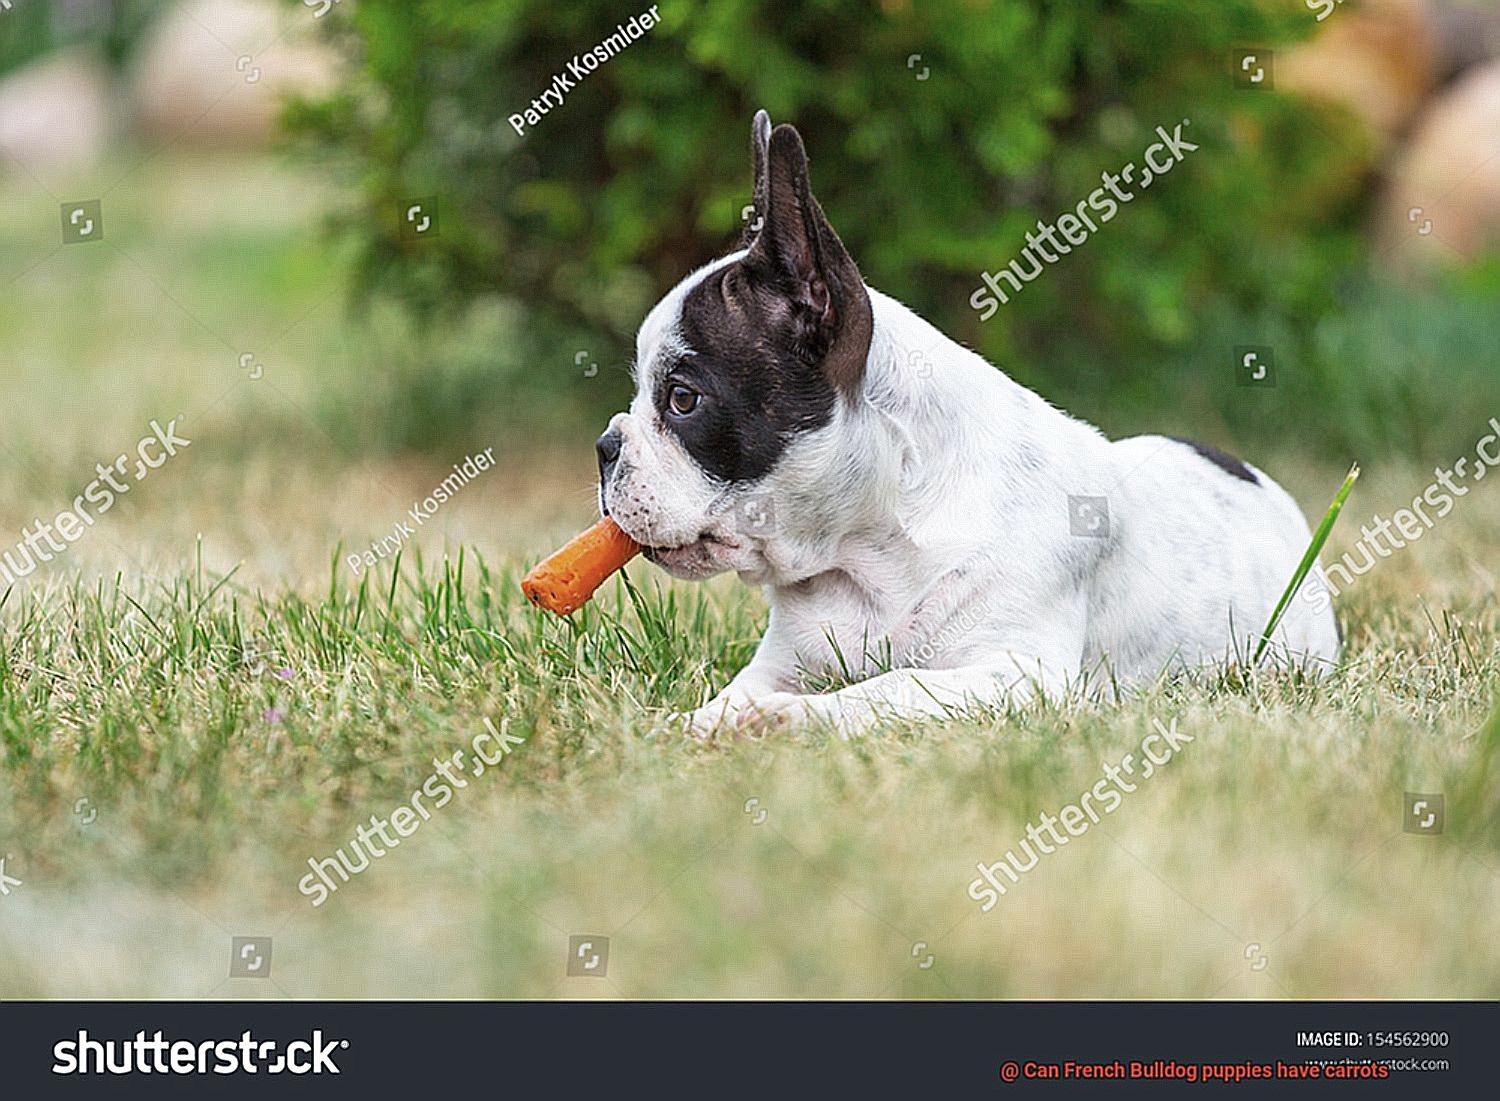 Can French Bulldog puppies have carrots-3